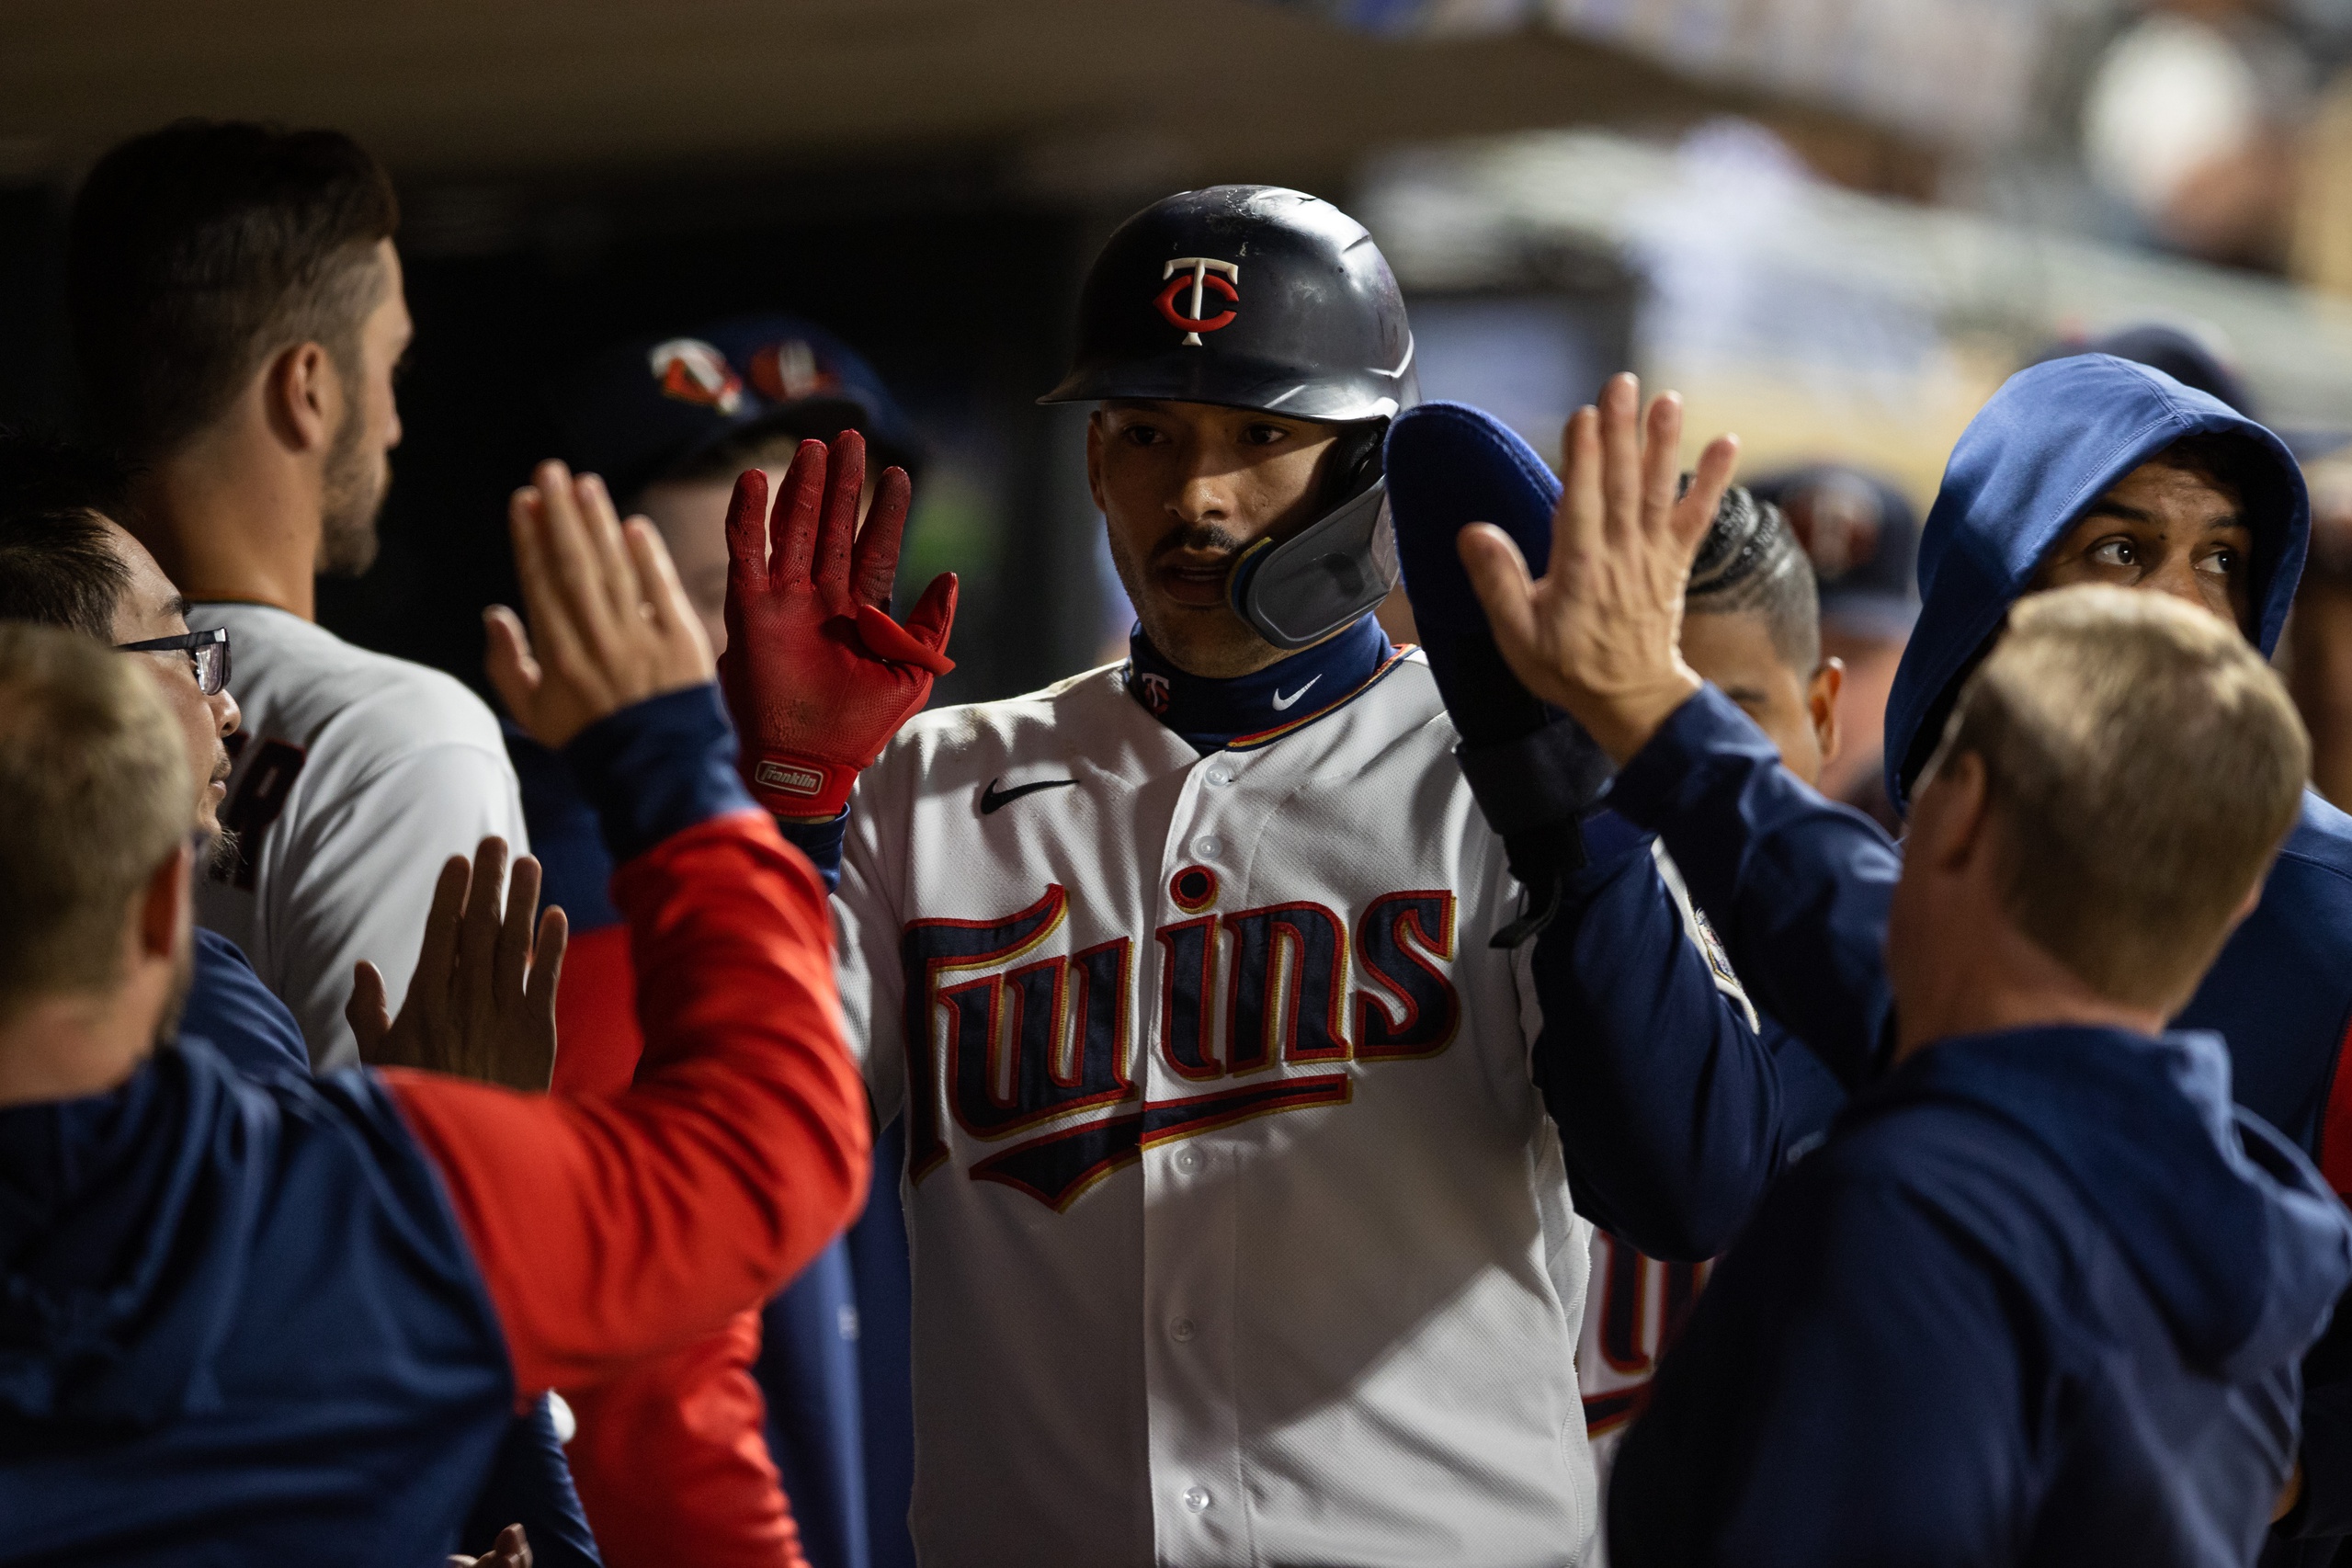 Carlos Correa signs quirky, record-breaking deal with Twins